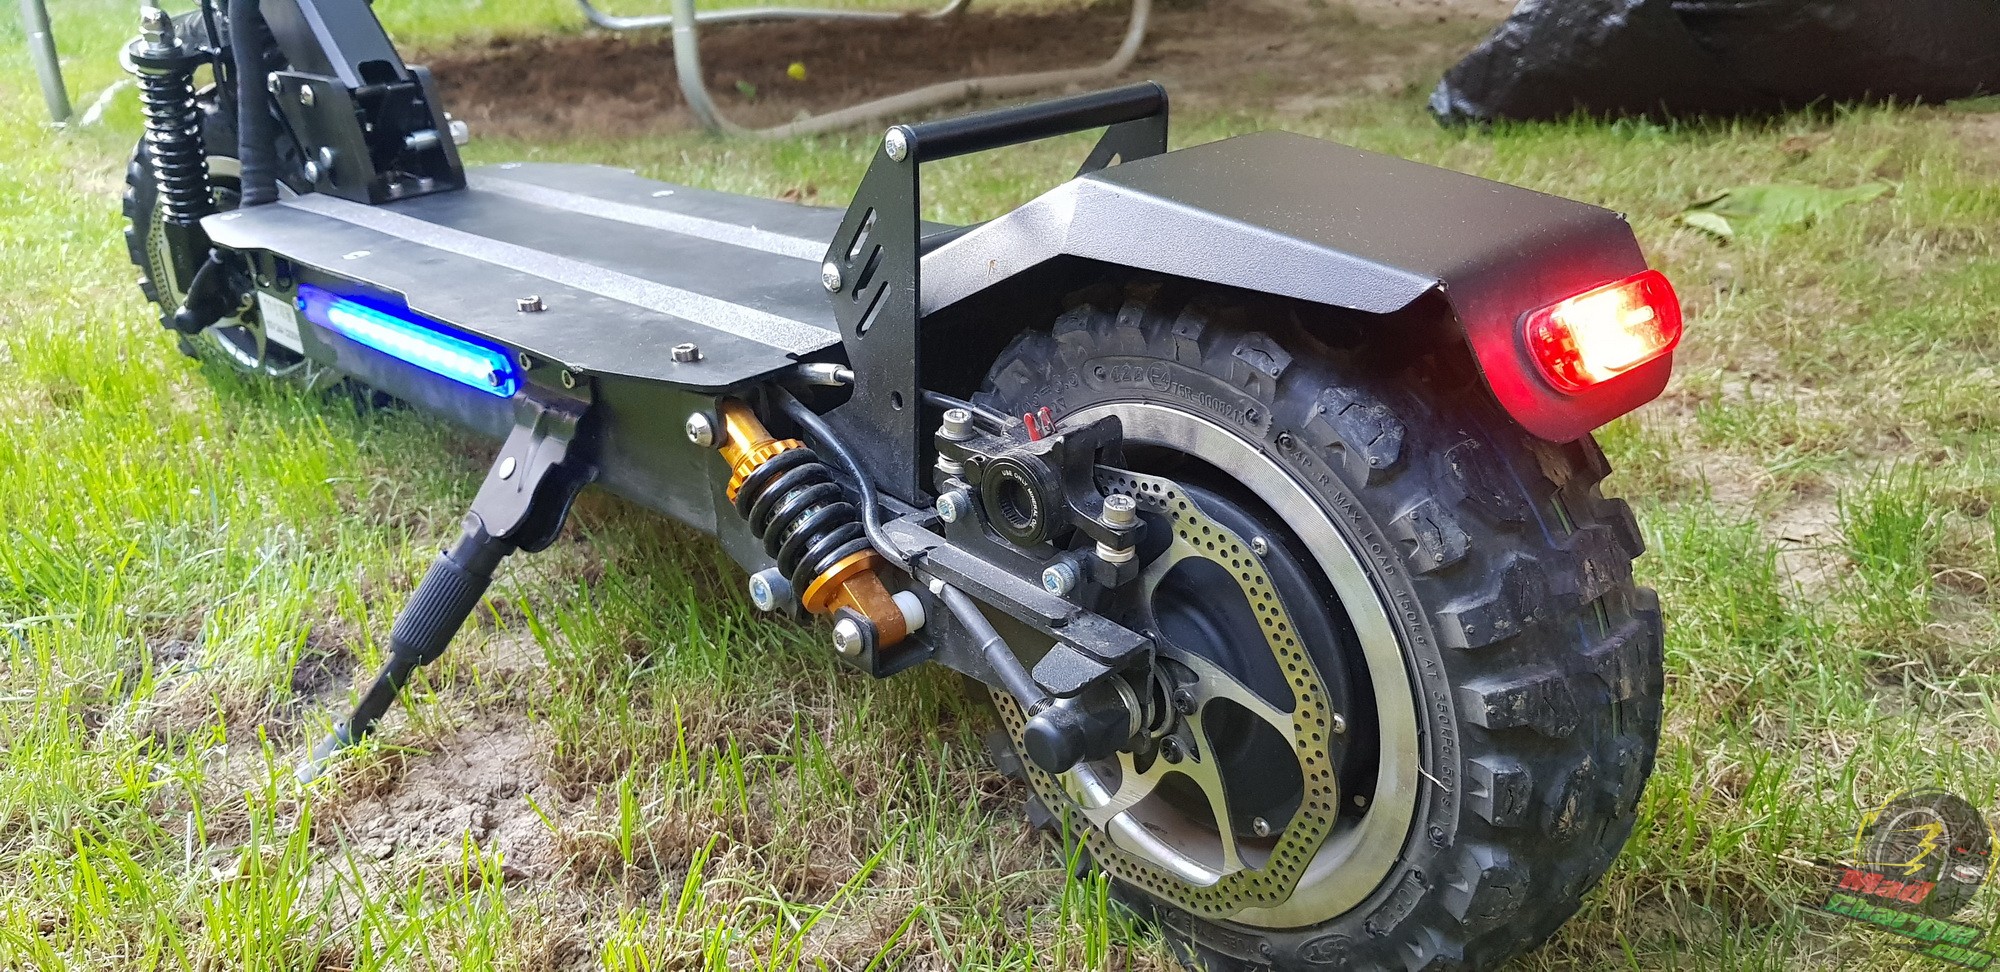 best off road electric scooter for adults